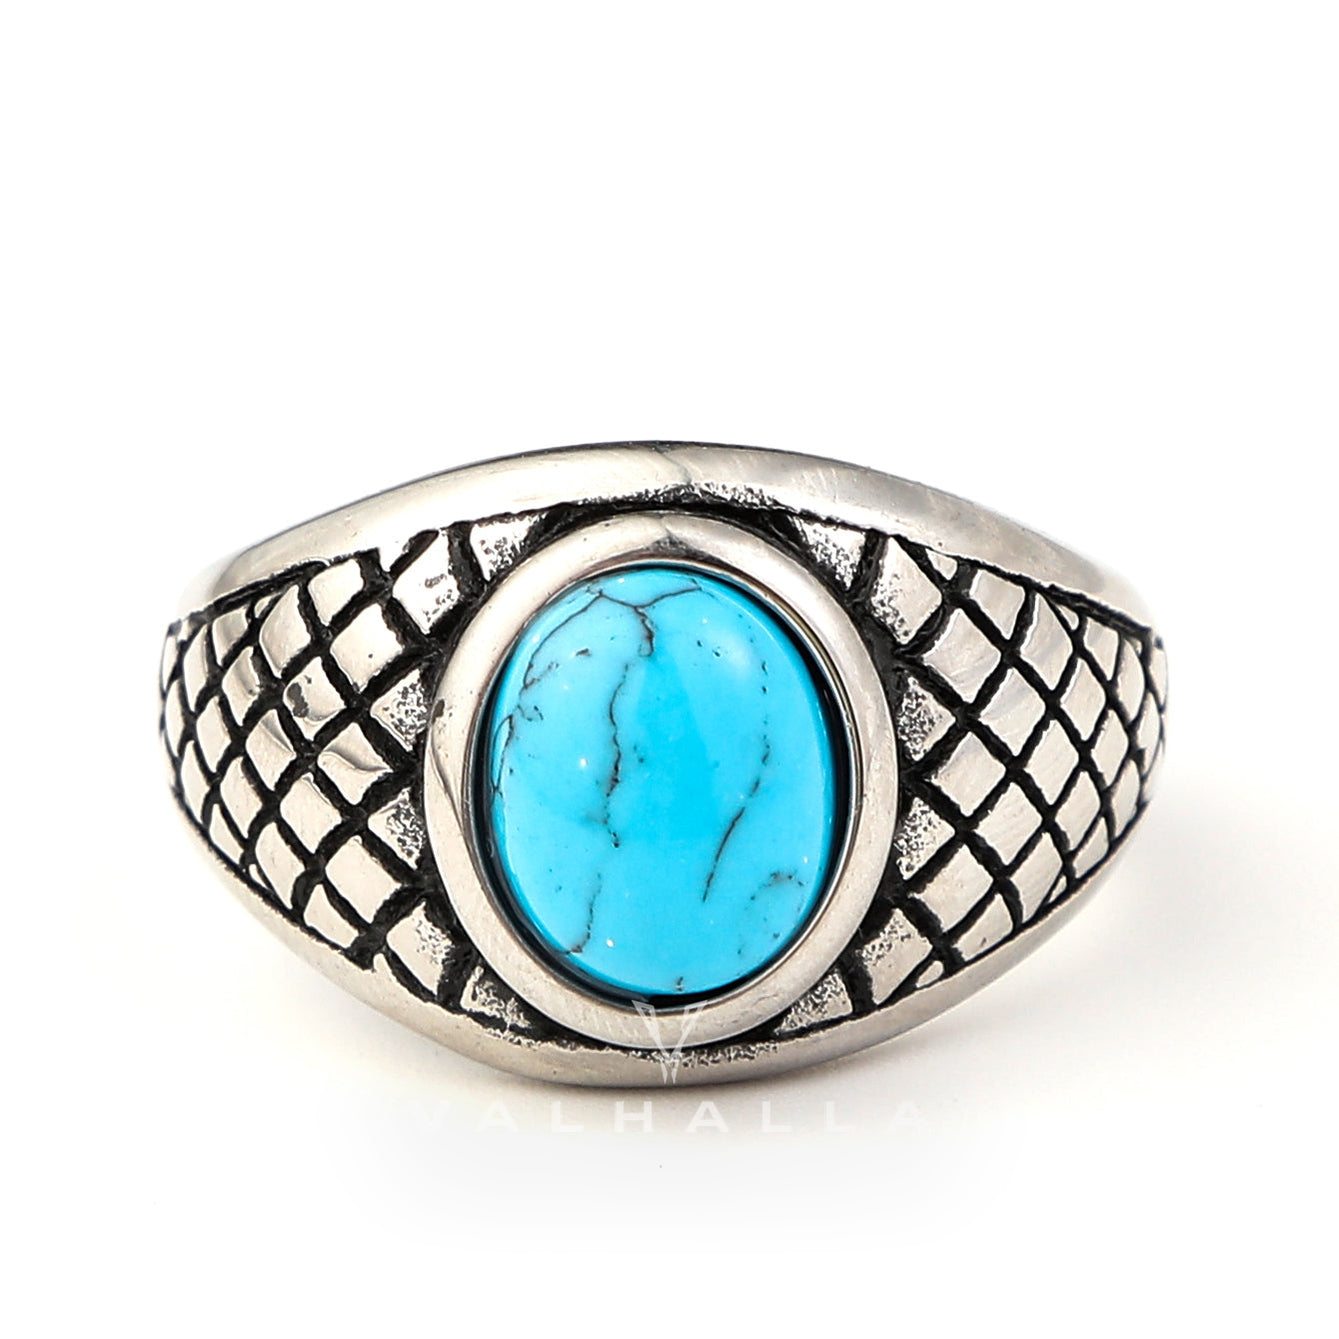 Plaid Stainless Steel Turquoise Ring